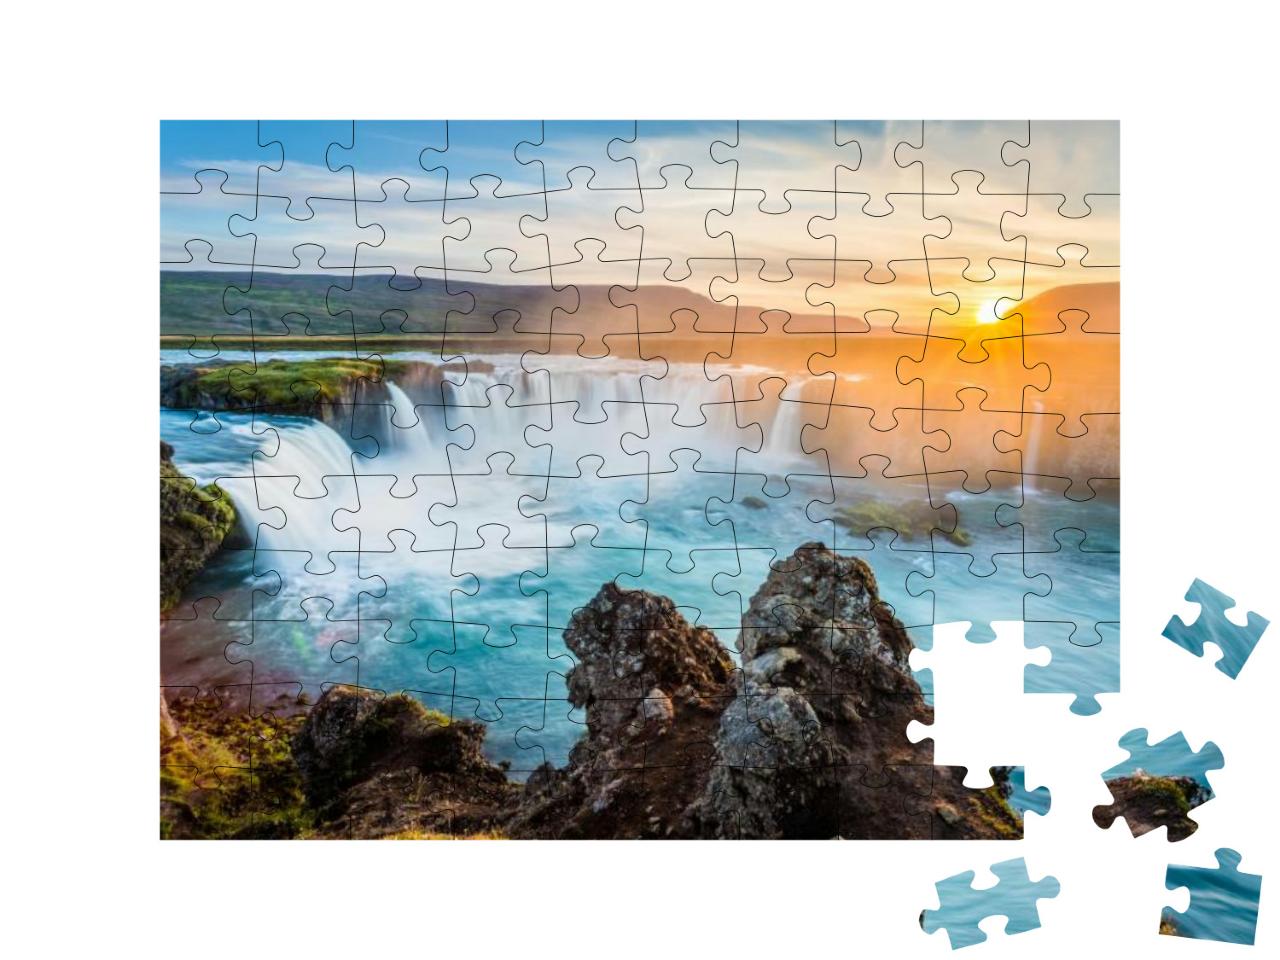 Godafoss Waterfall At Sunset, Iceland, Europe... Jigsaw Puzzle with 100 pieces